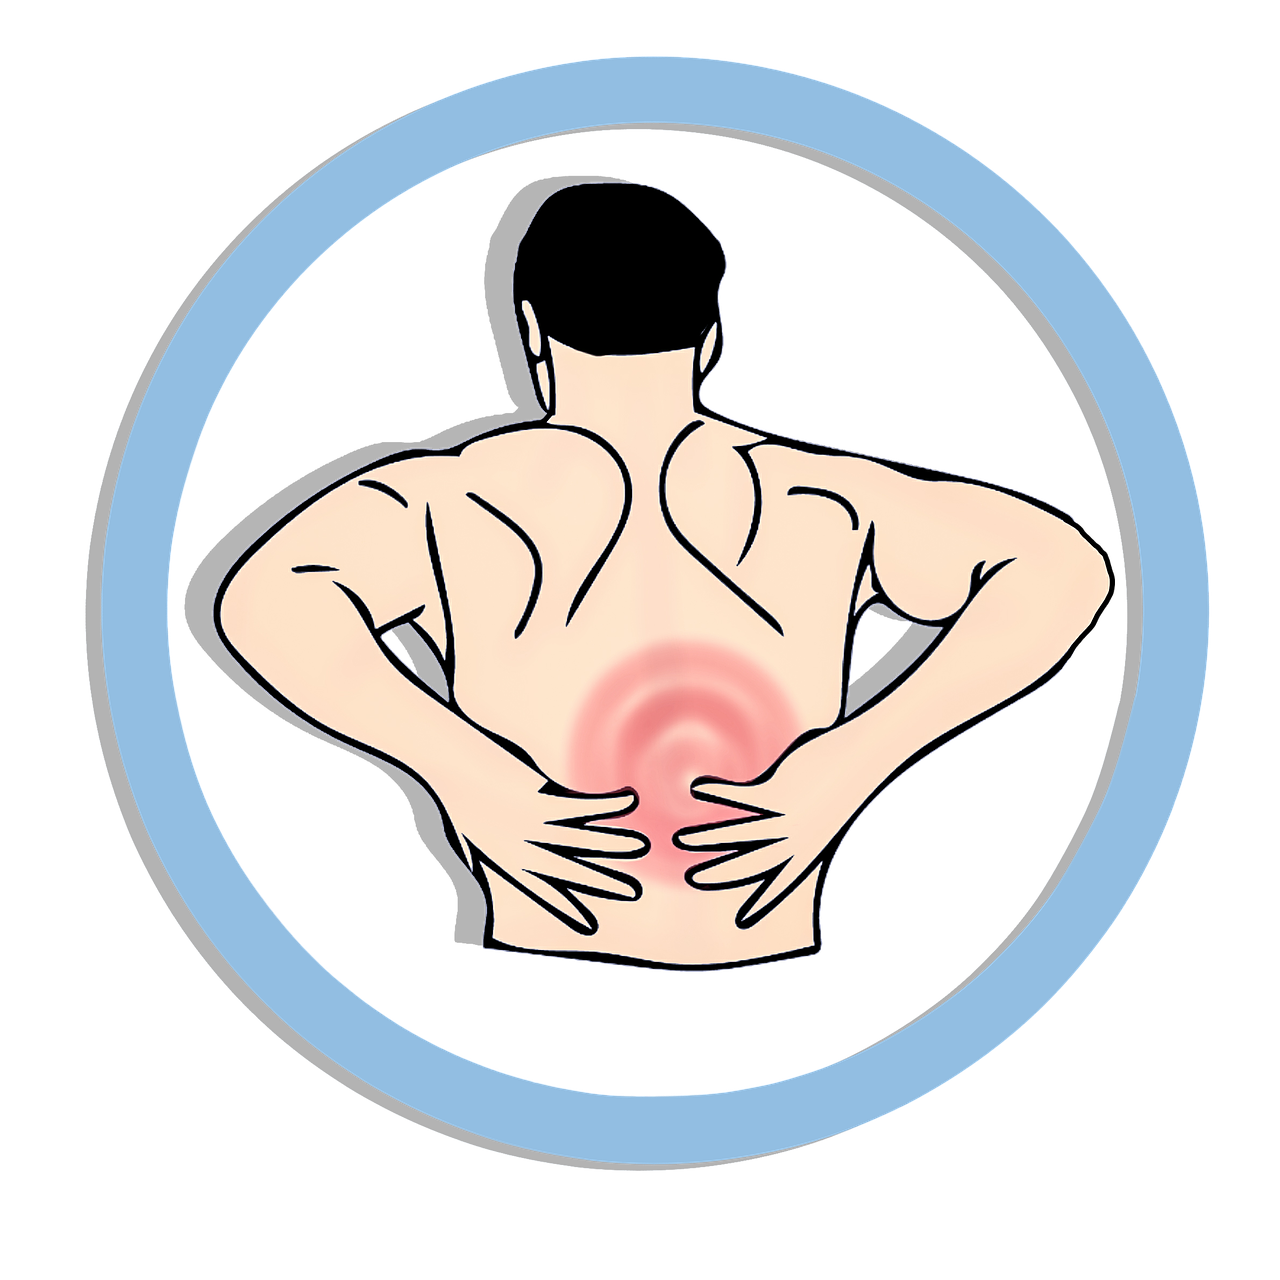 Exercises for back pain after a car accident